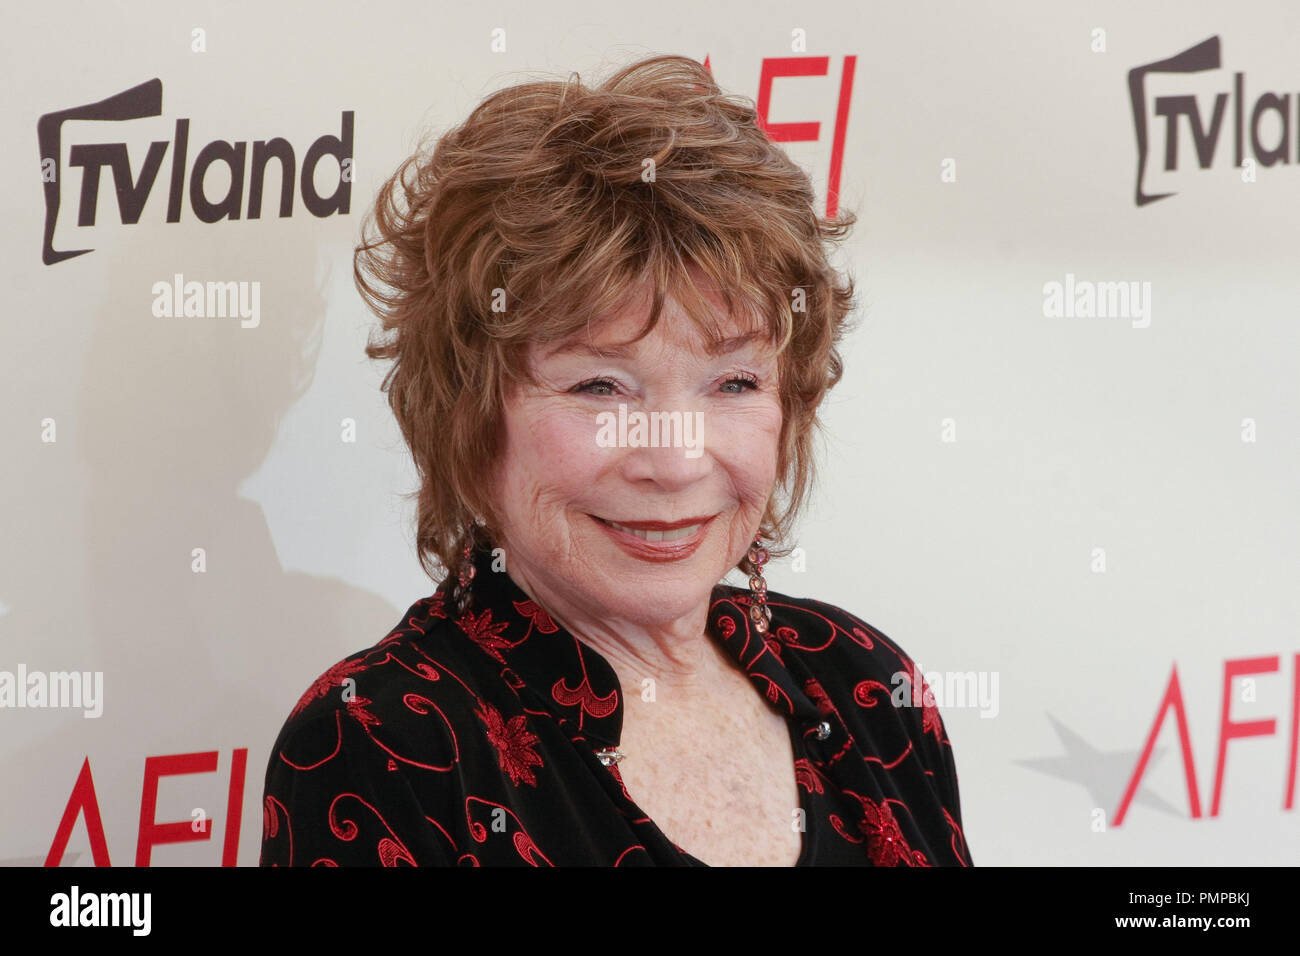 Shirley MacLaine at the 40th annual American Film Institute's life-achievement award. Arrivals held at Sony Studios in Culver City, CA June 7, 2012. Photo by Joe Martinez / PictureLux Stock Photo